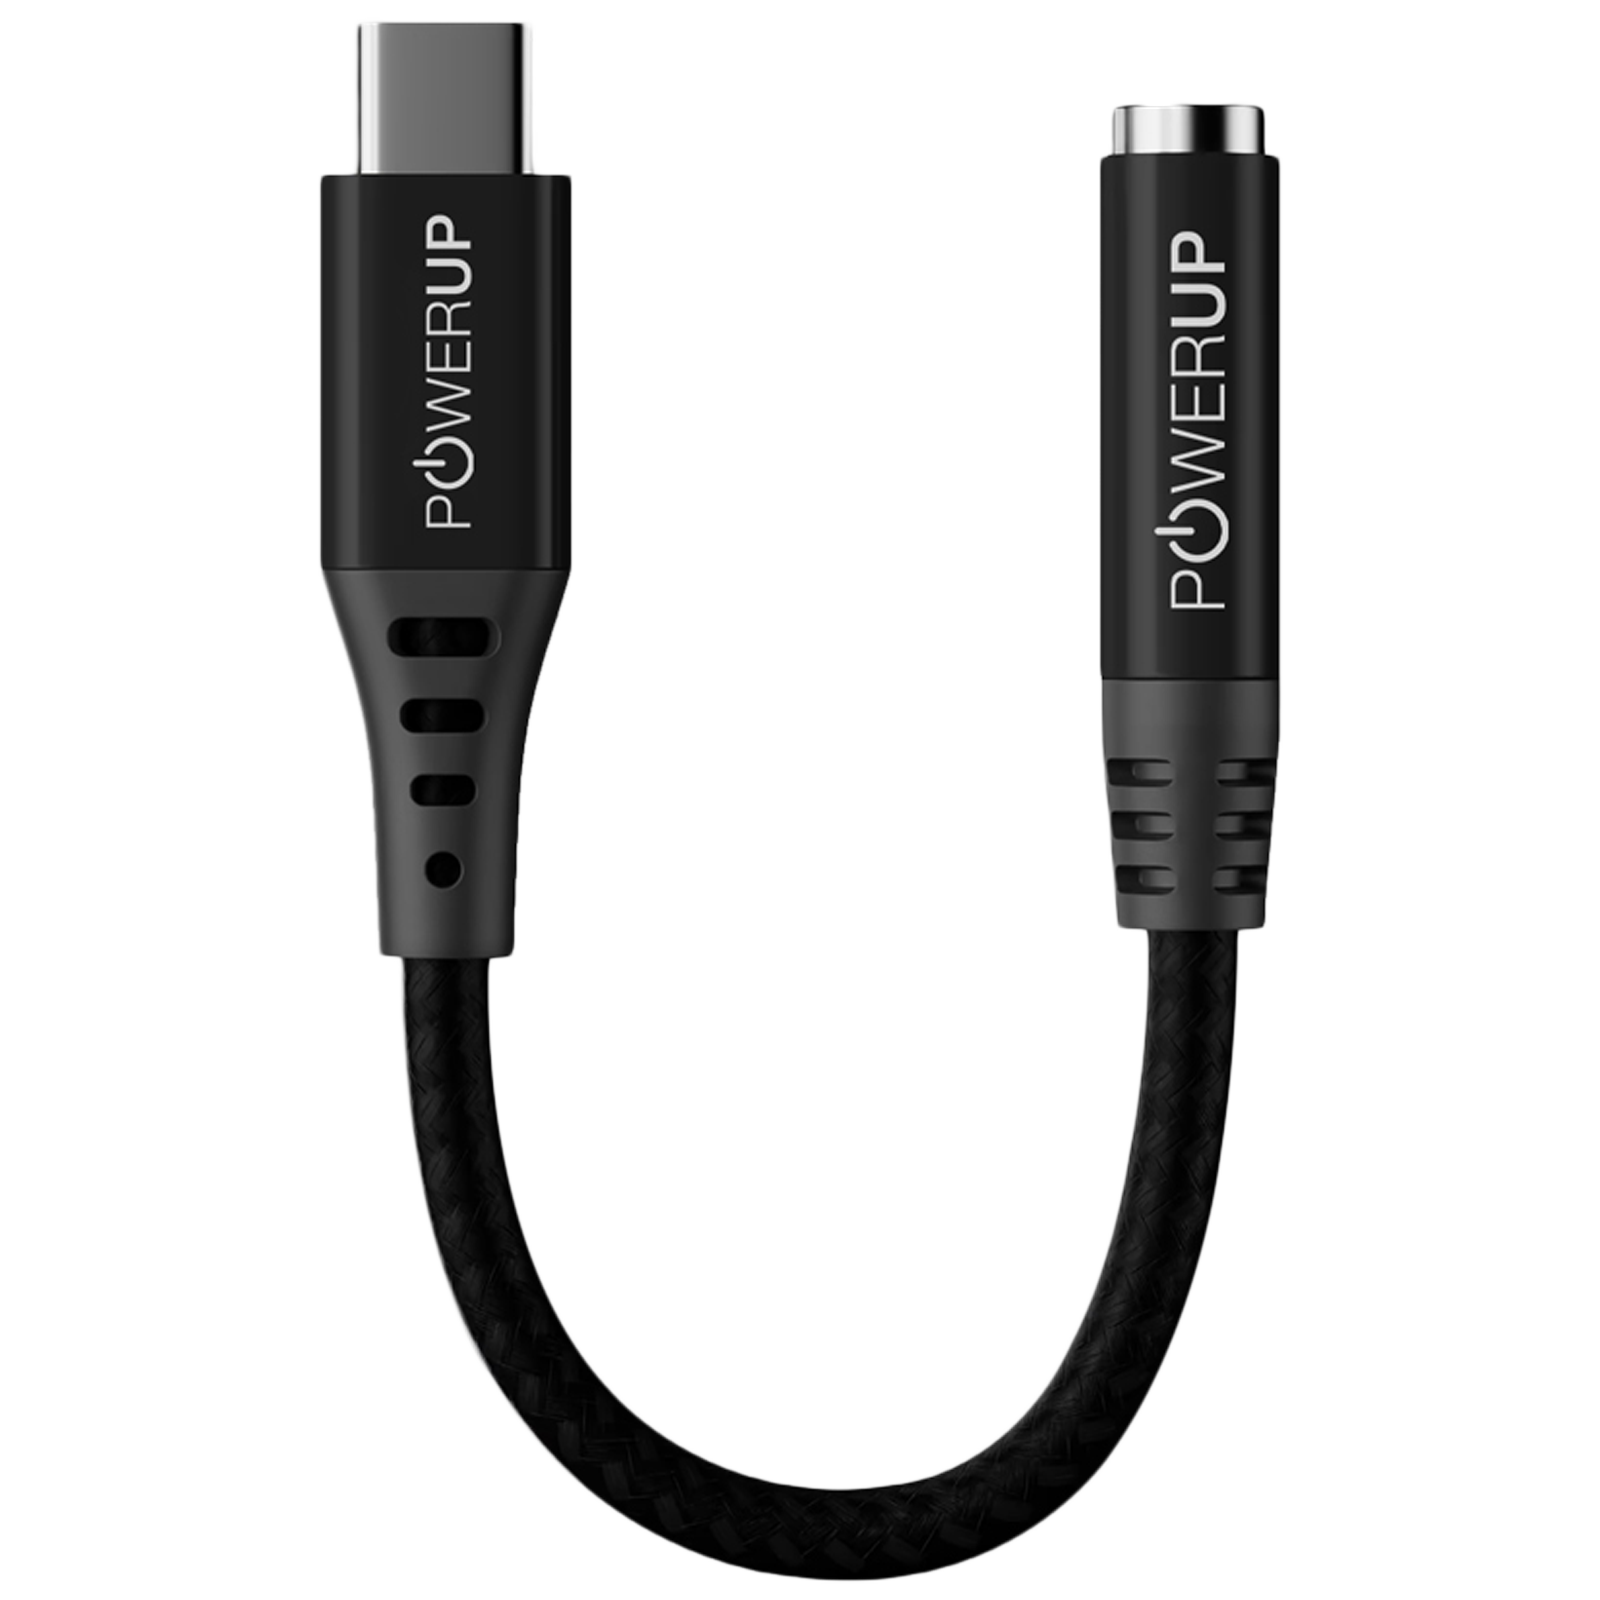 PowerUp 0.12 Meter USB 3.0 Type-C to 3.5mm Stereo Audio Aux Cable (PUP-TCTA-12BK, Black)_1